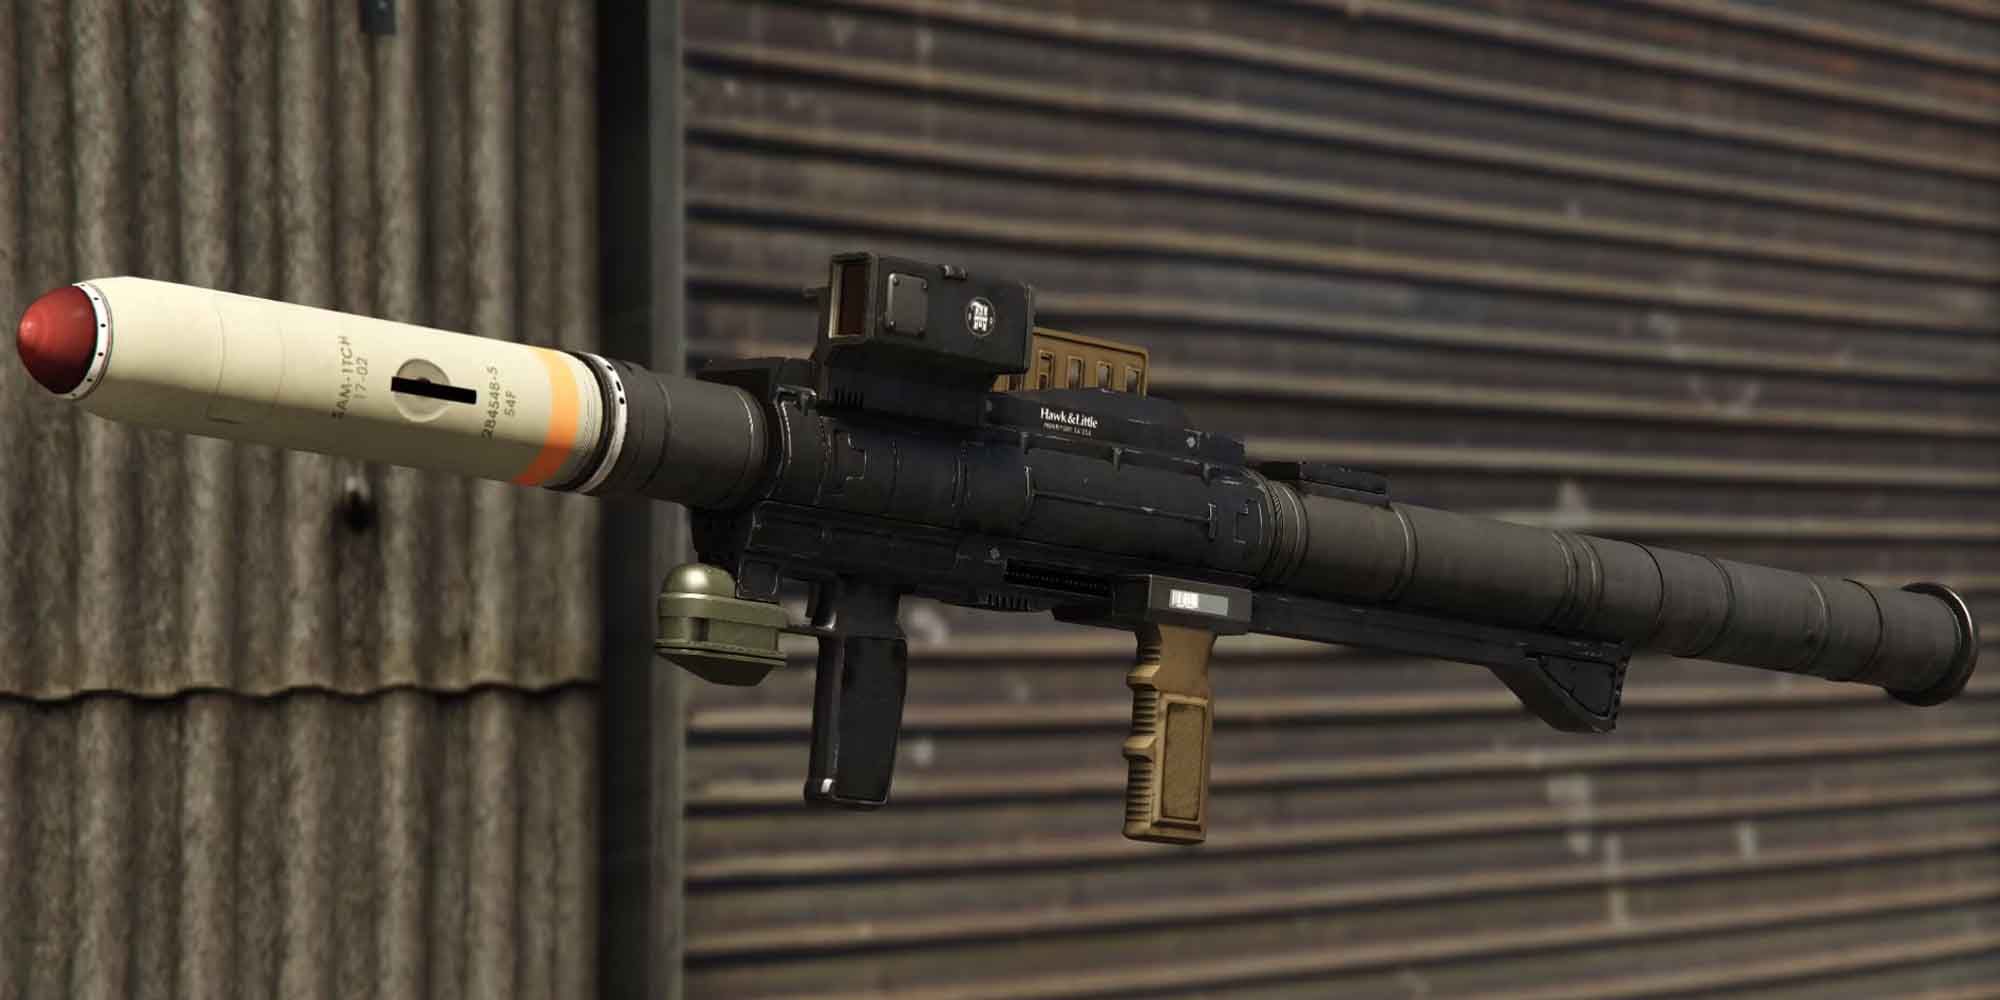 The "fire-and-forget" rocket launcher in GTA 5